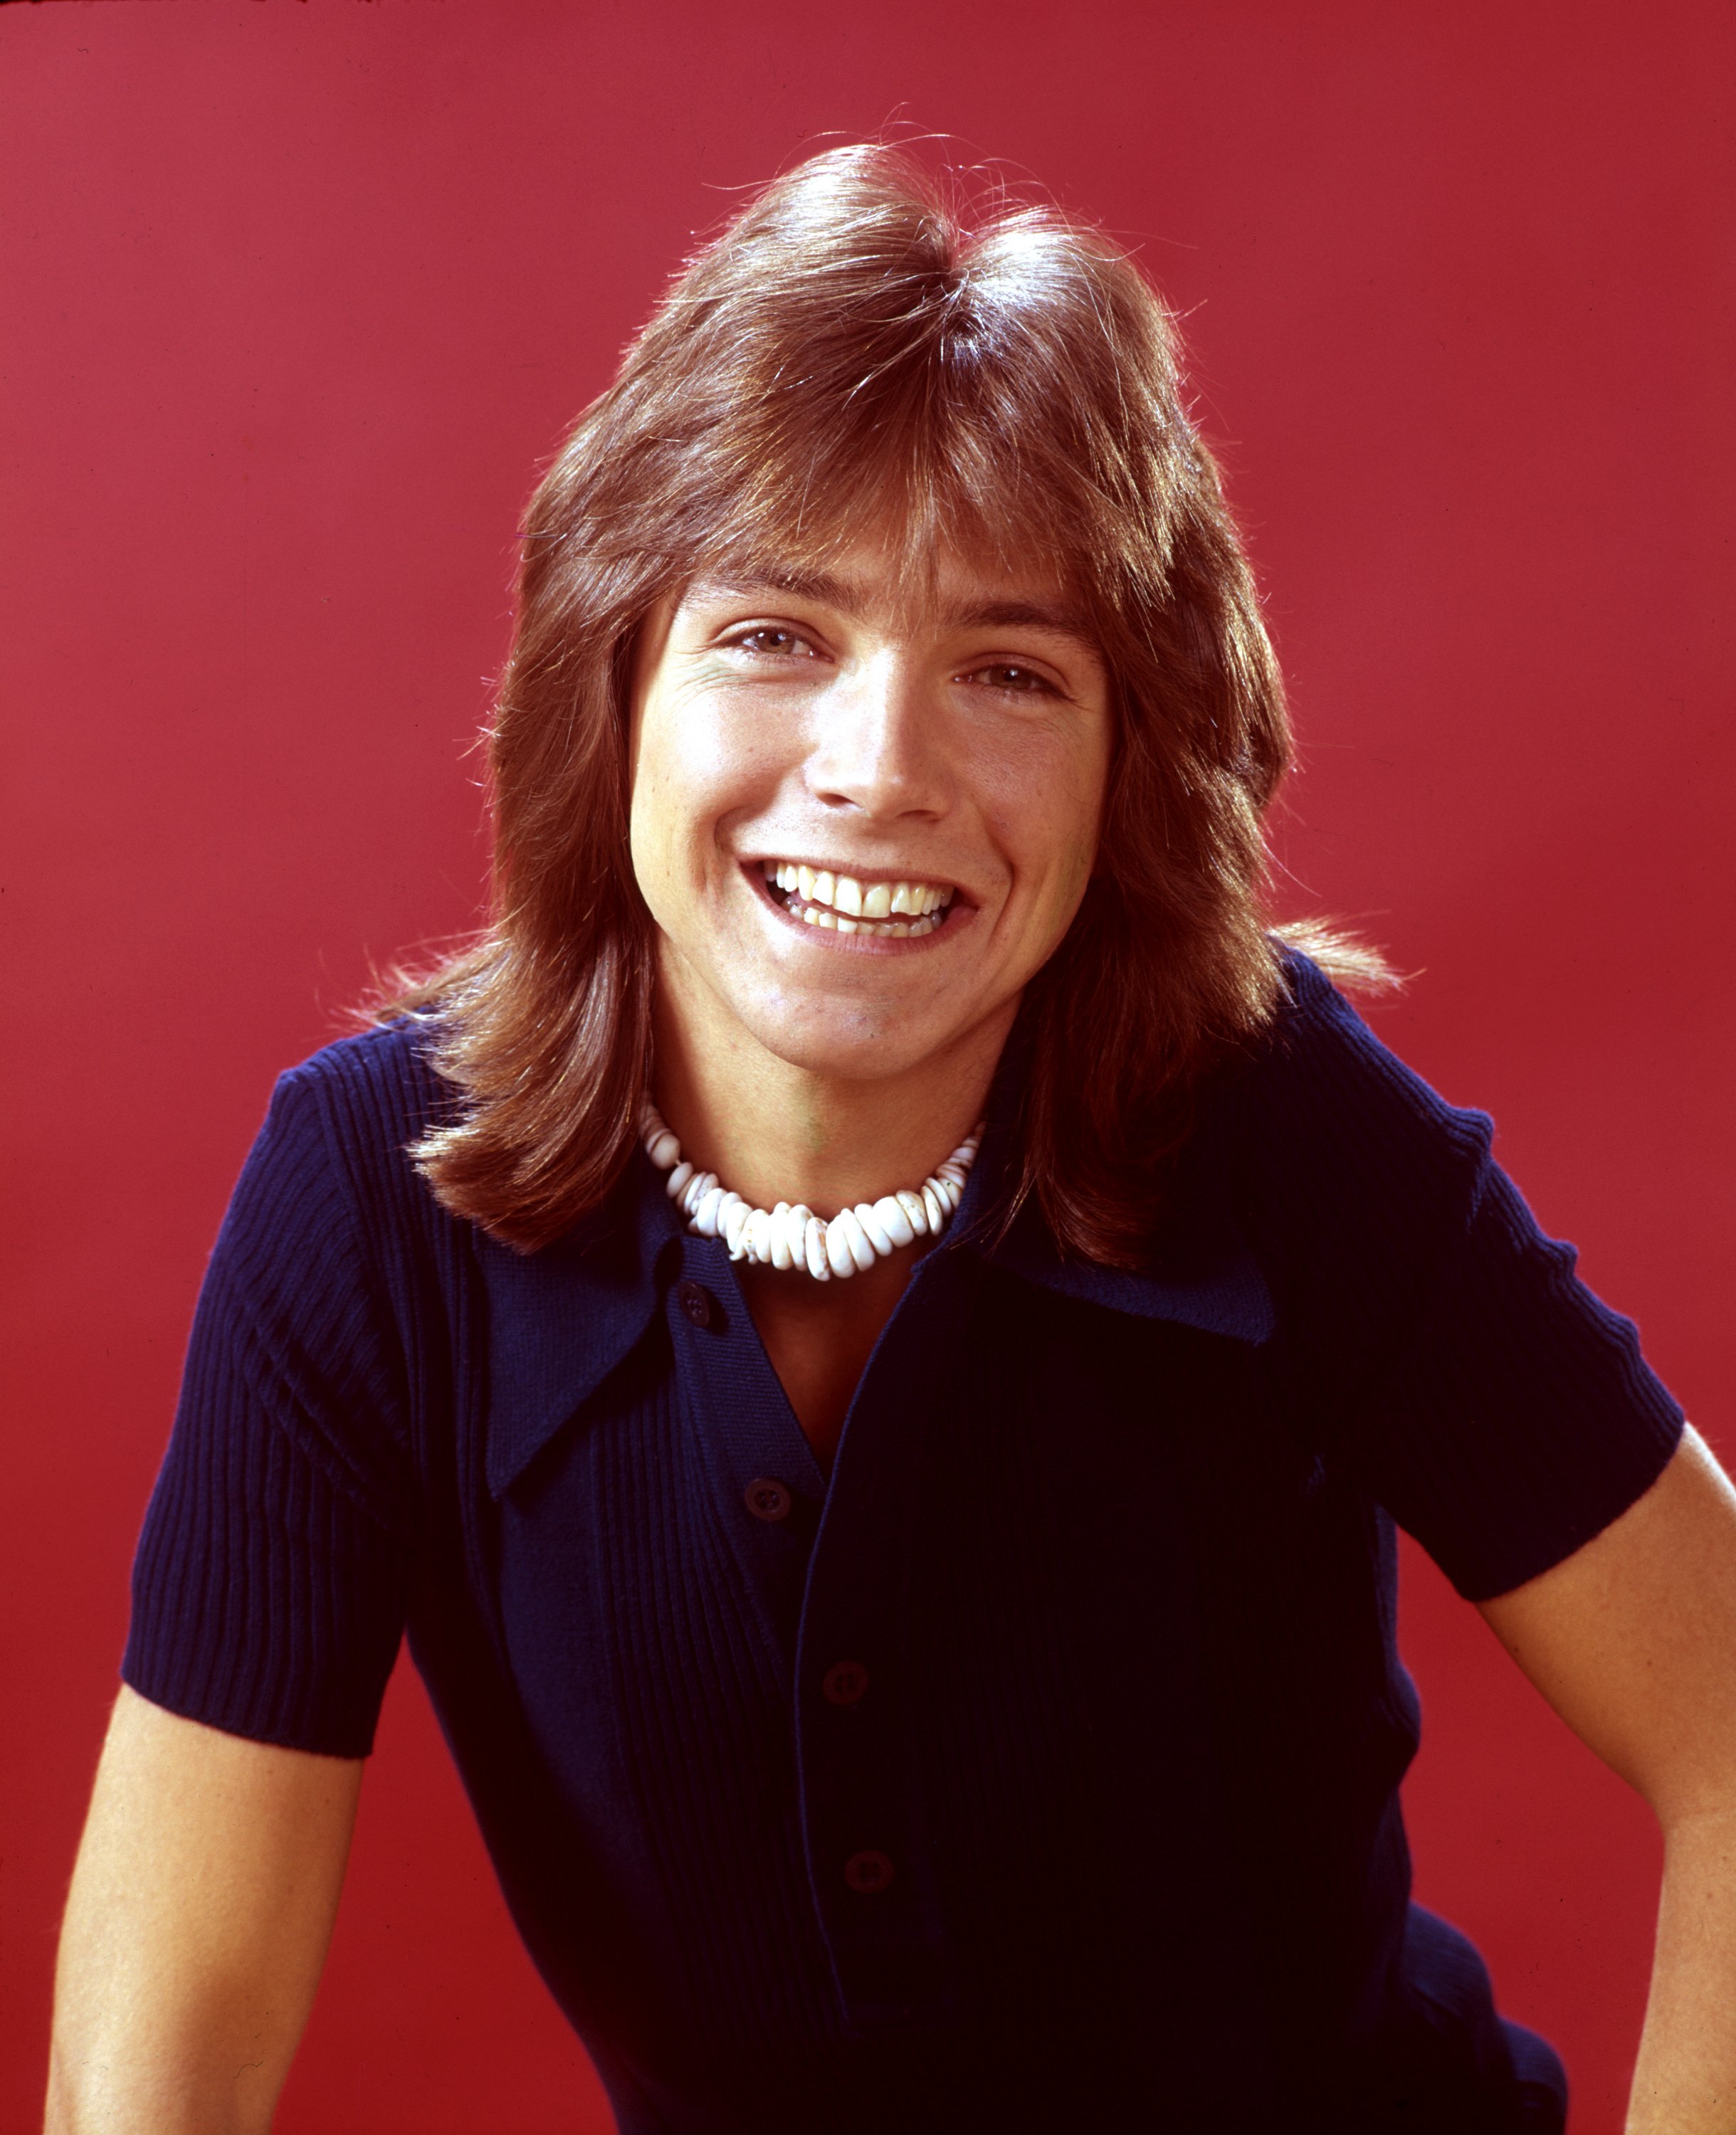 David Cassidy as Keith Partridge on season two of "The Partridge Family" on May 22, 1972 | Source: Getty Images